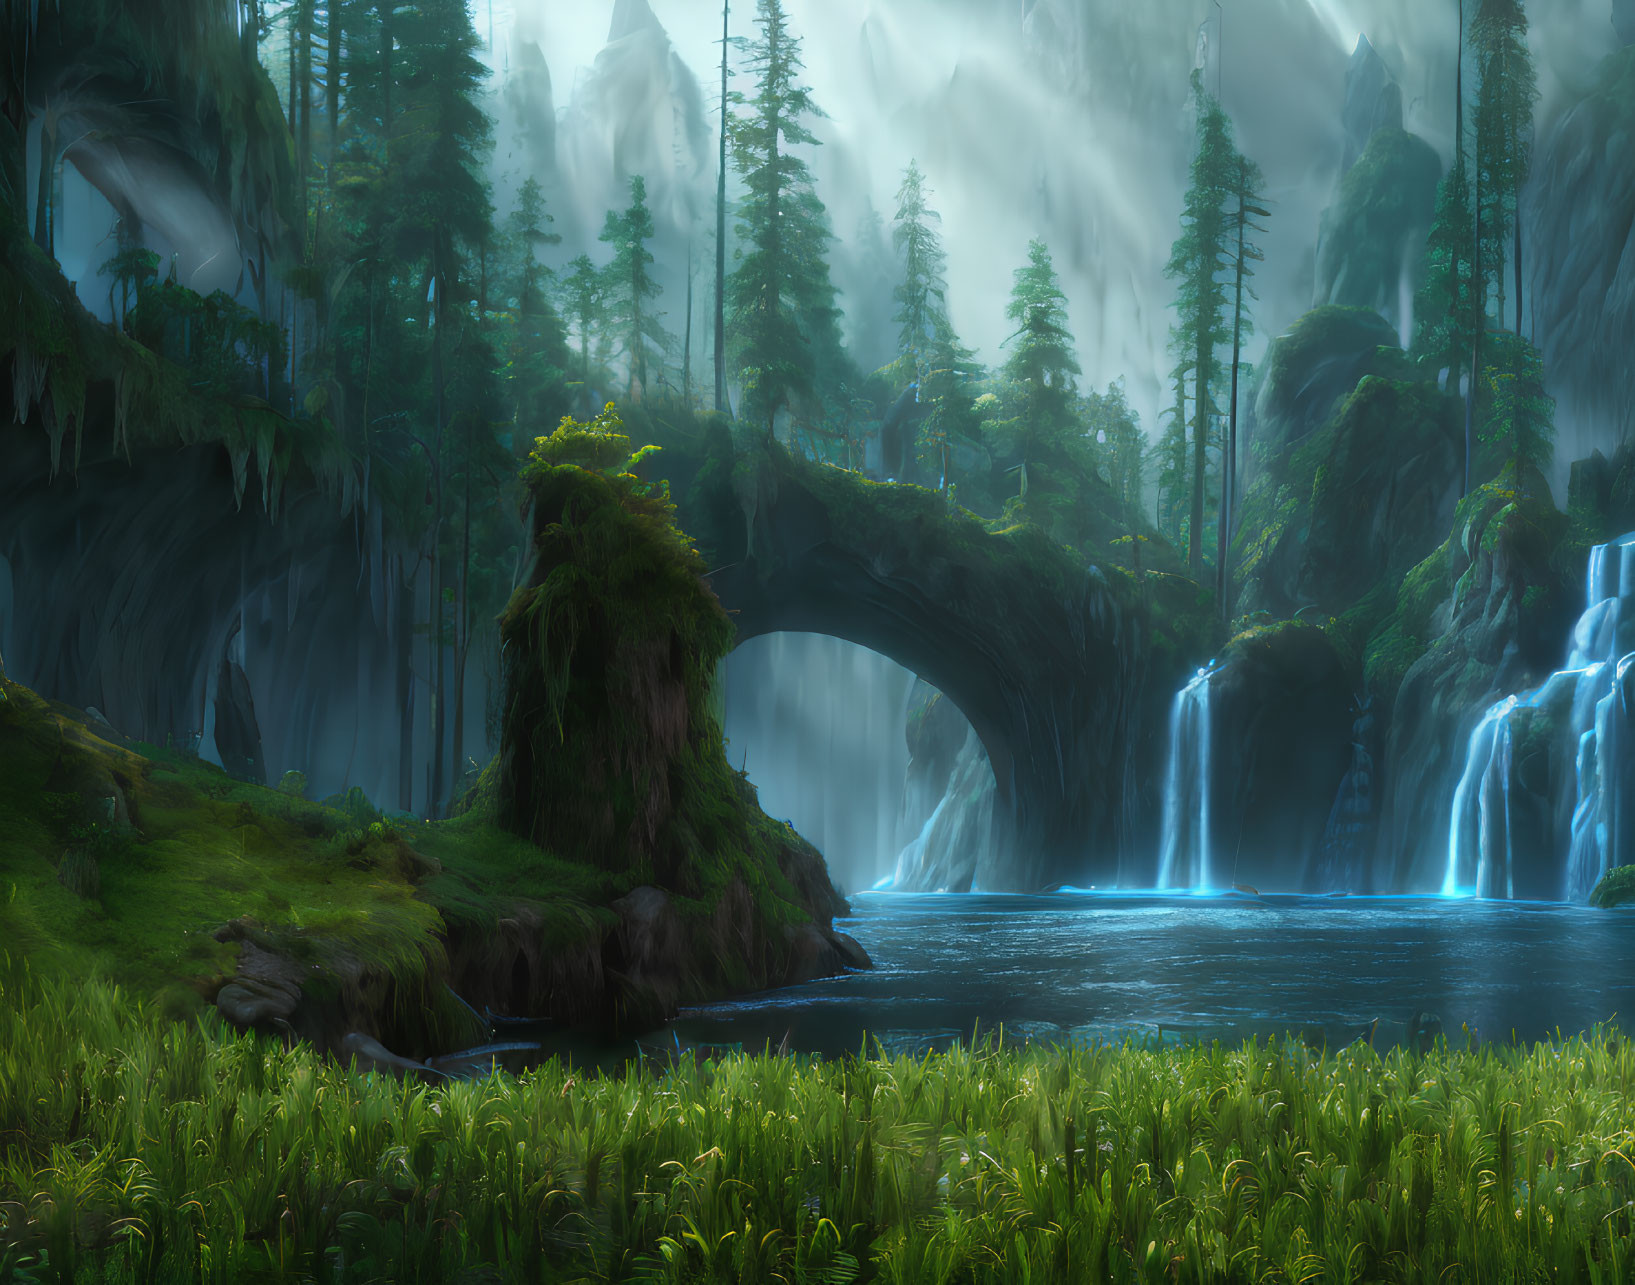 Enchanting forest landscape with waterfalls, natural bridge, and serene river